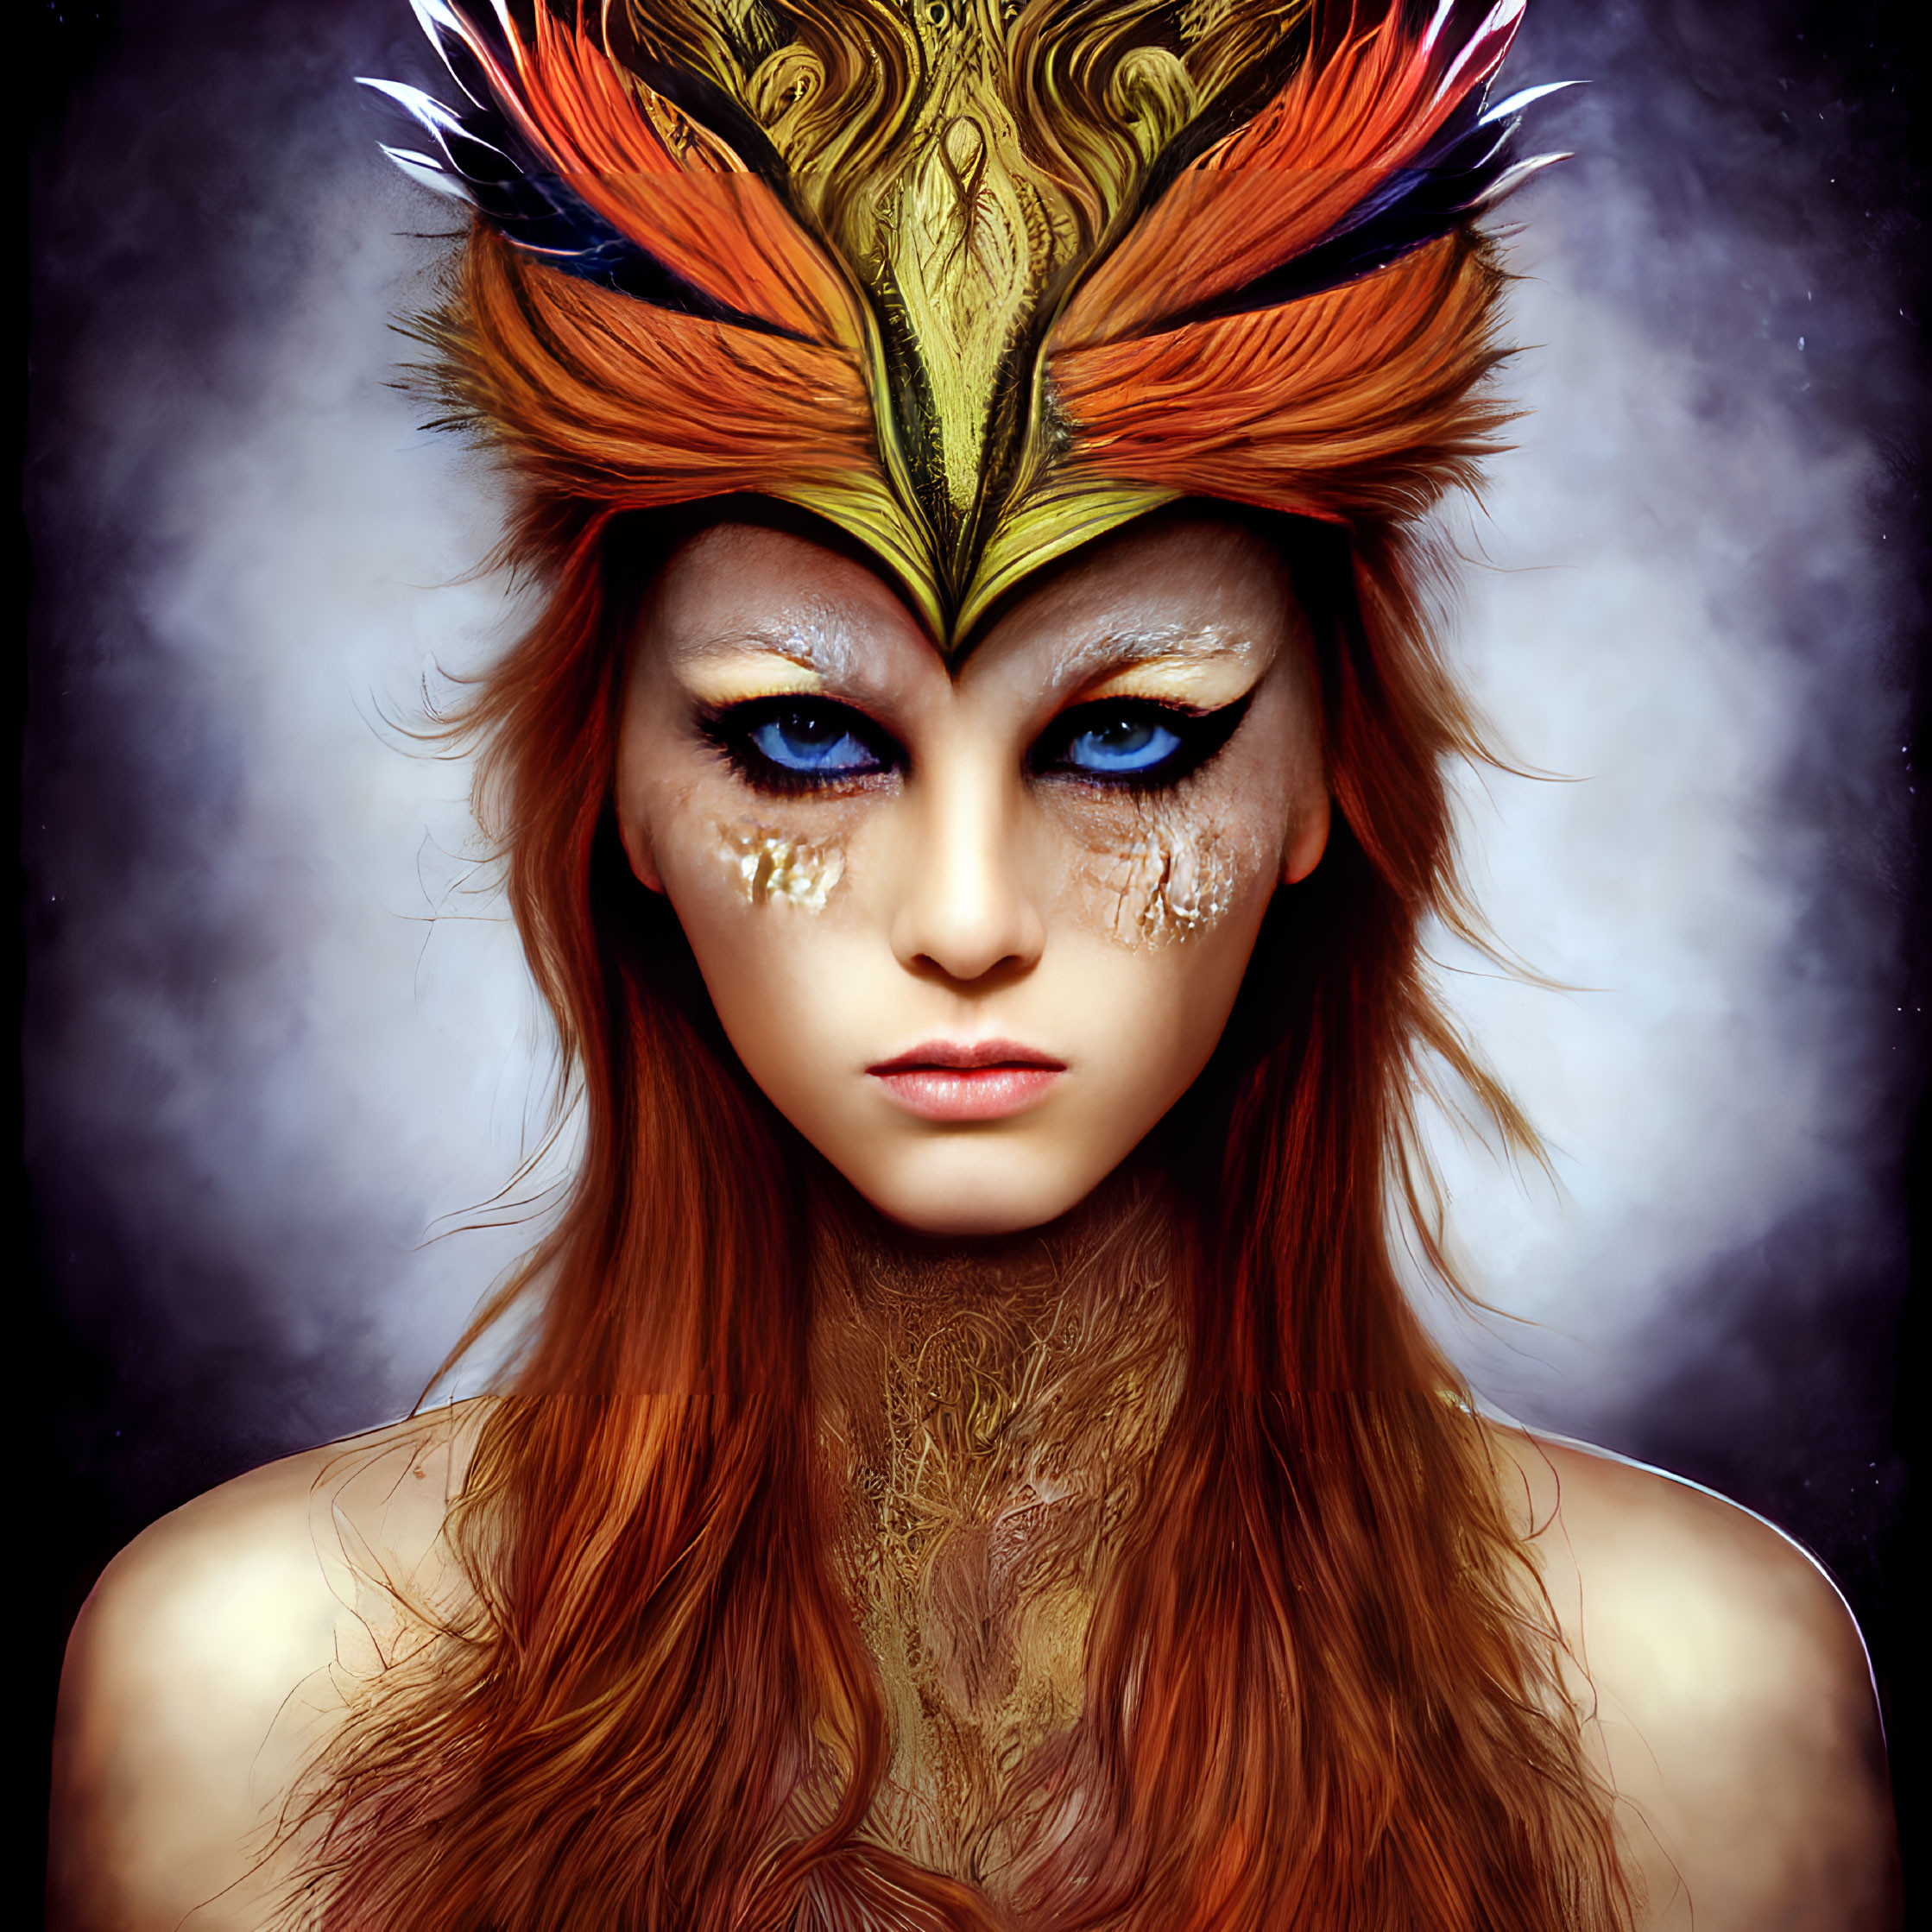 Person wearing vibrant feather headdress with intense blue eyes and gold leaf makeup on dark background